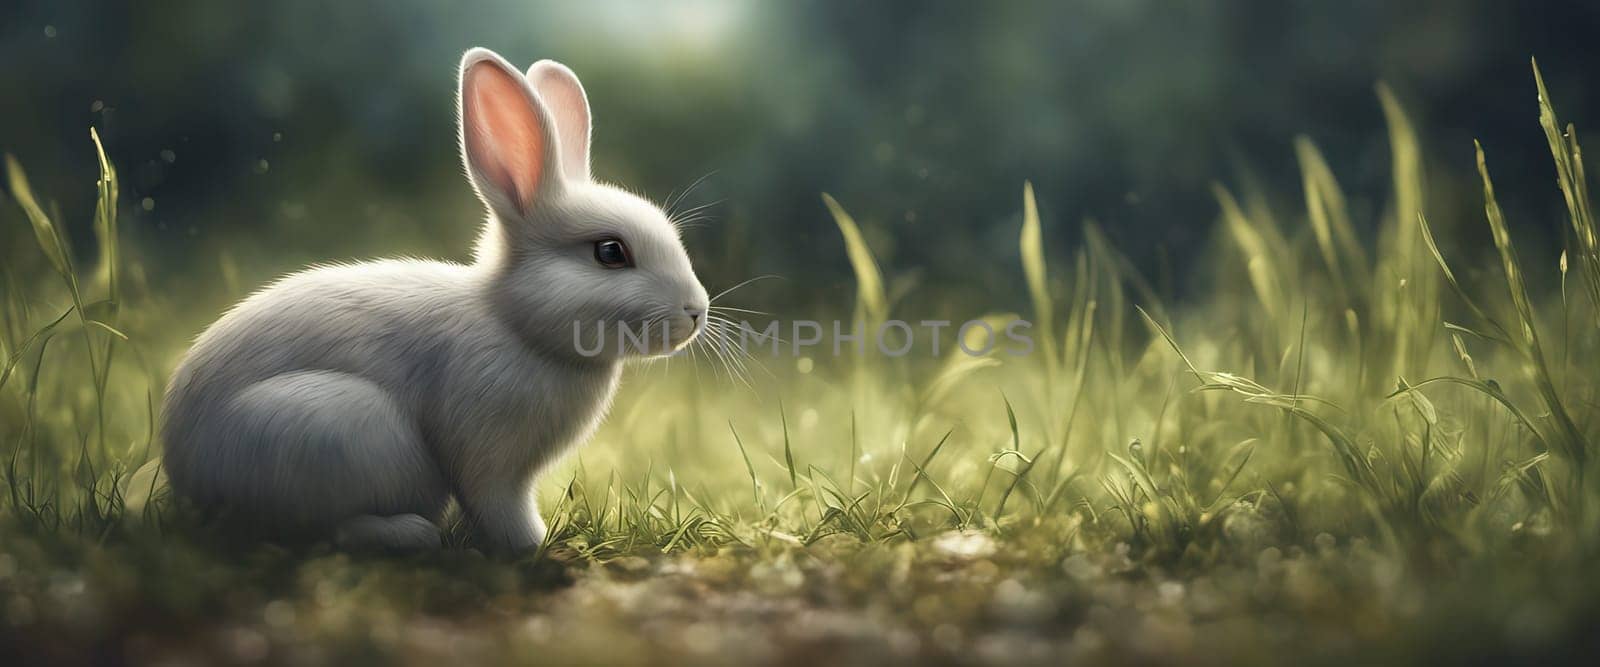 A small rabbit sitting in a field on green grass